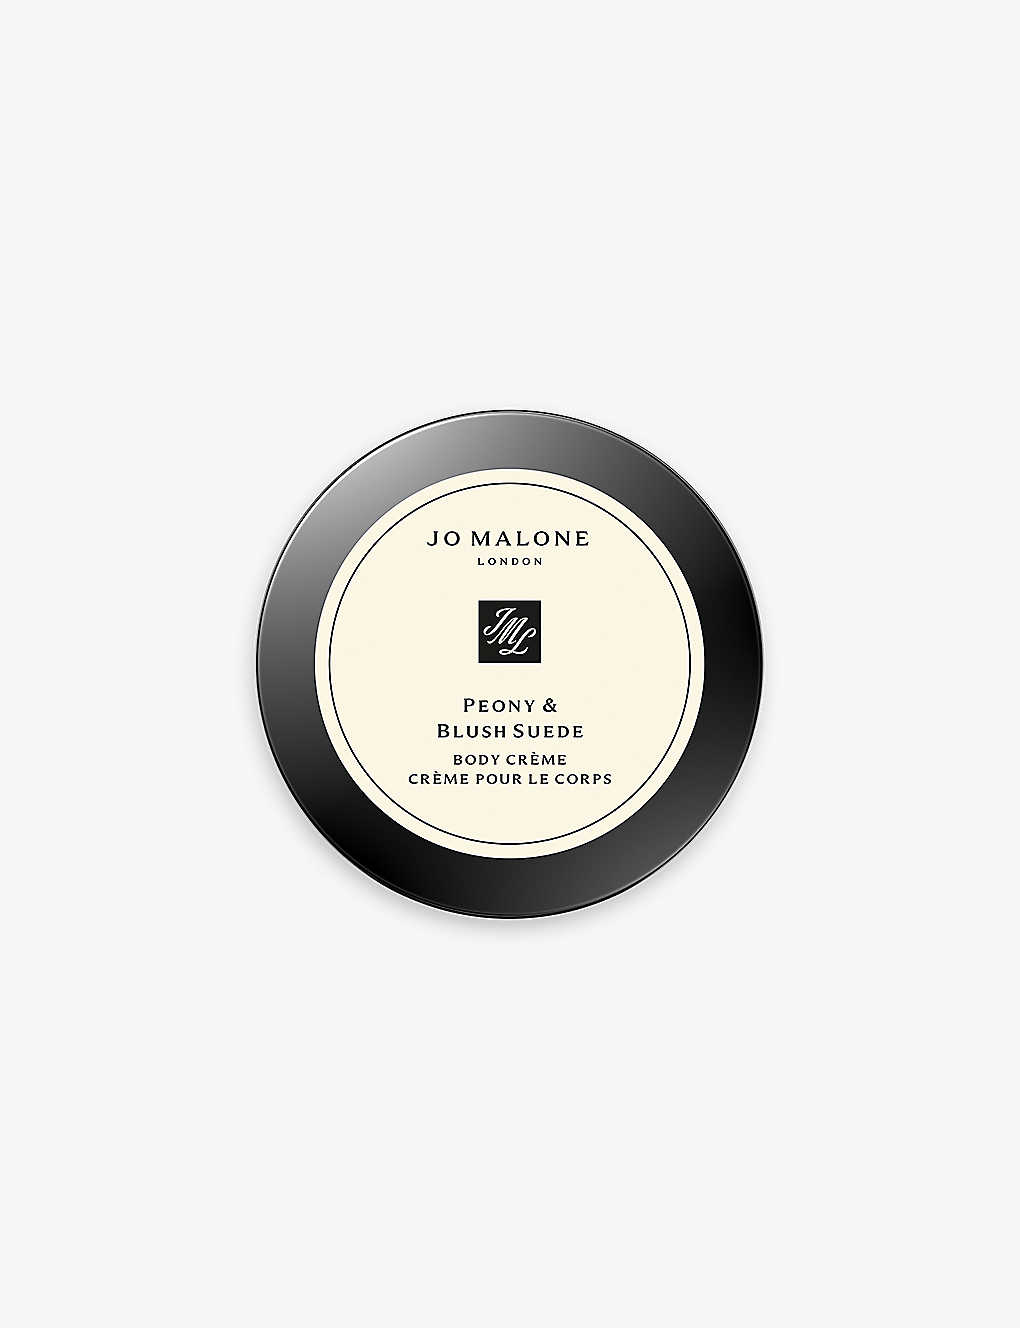 Jo Malone London Peony & Blush Suede Body Crème, 50ml - One Size In Colourless